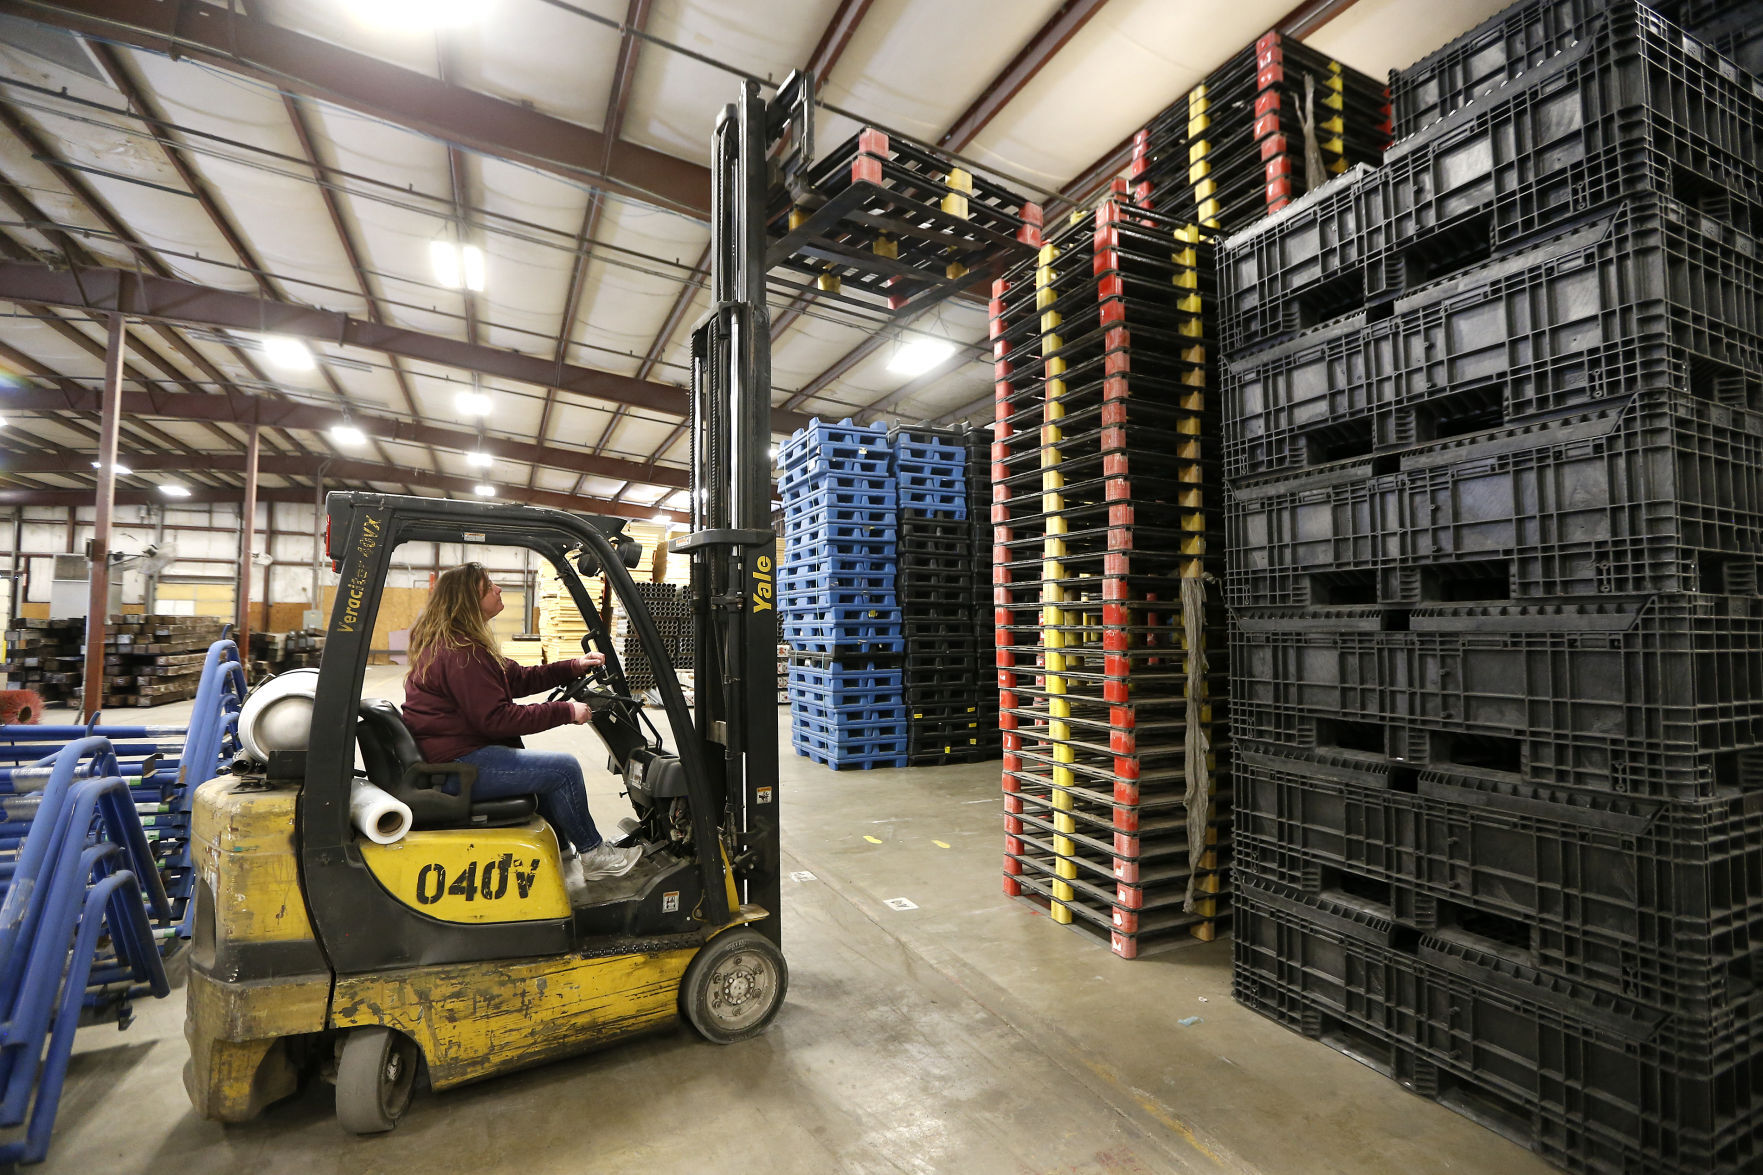 Jessi Walker, manager of Repurposed Materials in Maquoketa, Iowa, stacks up flat pallets that are among the many items for sale.    PHOTO CREDIT: Dave Kettering